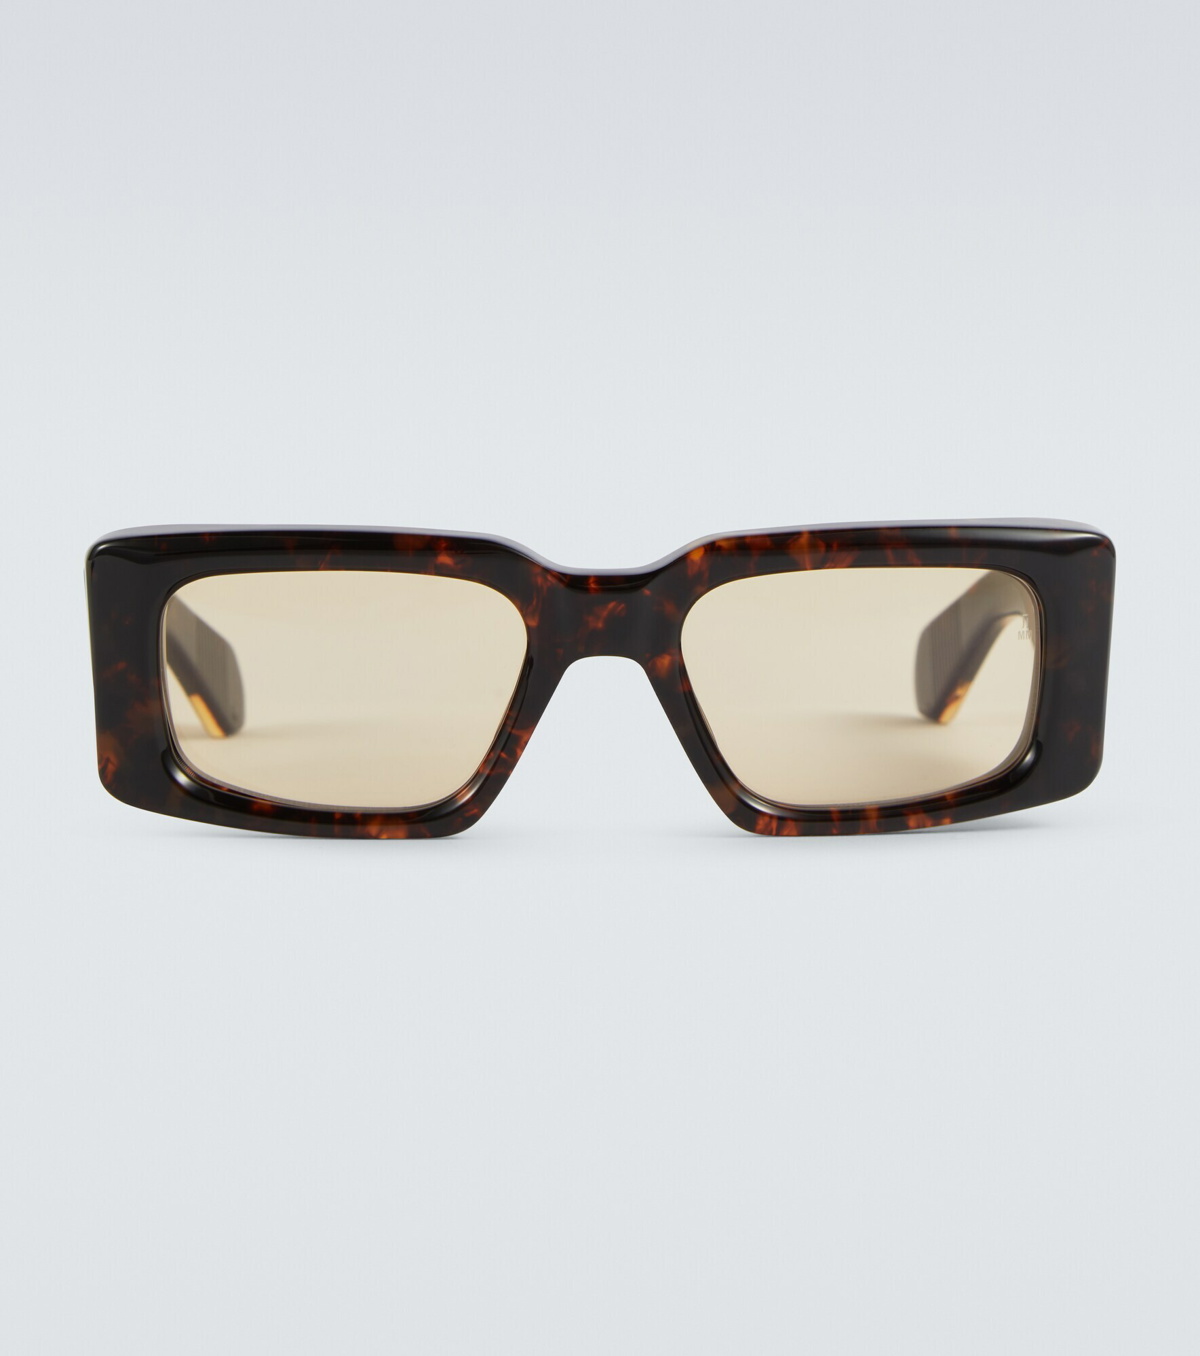 Jacques Marie Mage - Supersonic rectangular sunglasses Jacques Marie Mage